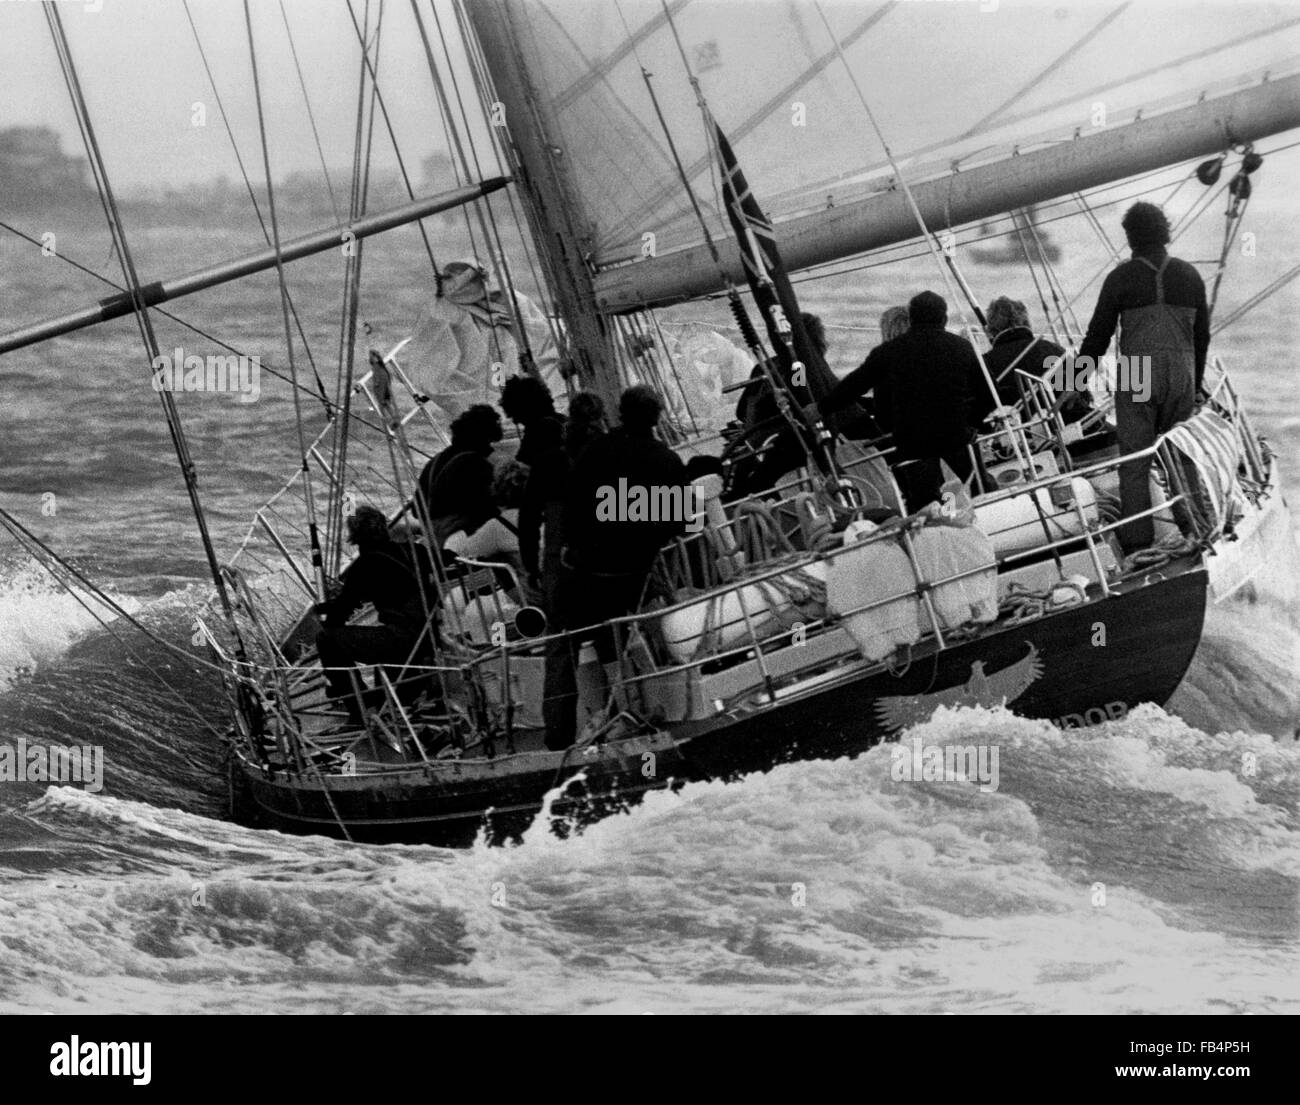 AJAX NEWS PHOTOS. 1978. PORTSMOUTH, ENGLAND.  - WHITBREAD ROUND THE WORLD RACE - MAXI RACER HEADS FOR FINISH - CONDOR (GB) RACES TO THE FINISH LINE OFF PORTSMOUTH AT END OF THE 4TH LEG.  PHOTO:JONATHAN EASTLAND/AJAX  REF:CONDOR WRTWR 78 Stock Photo